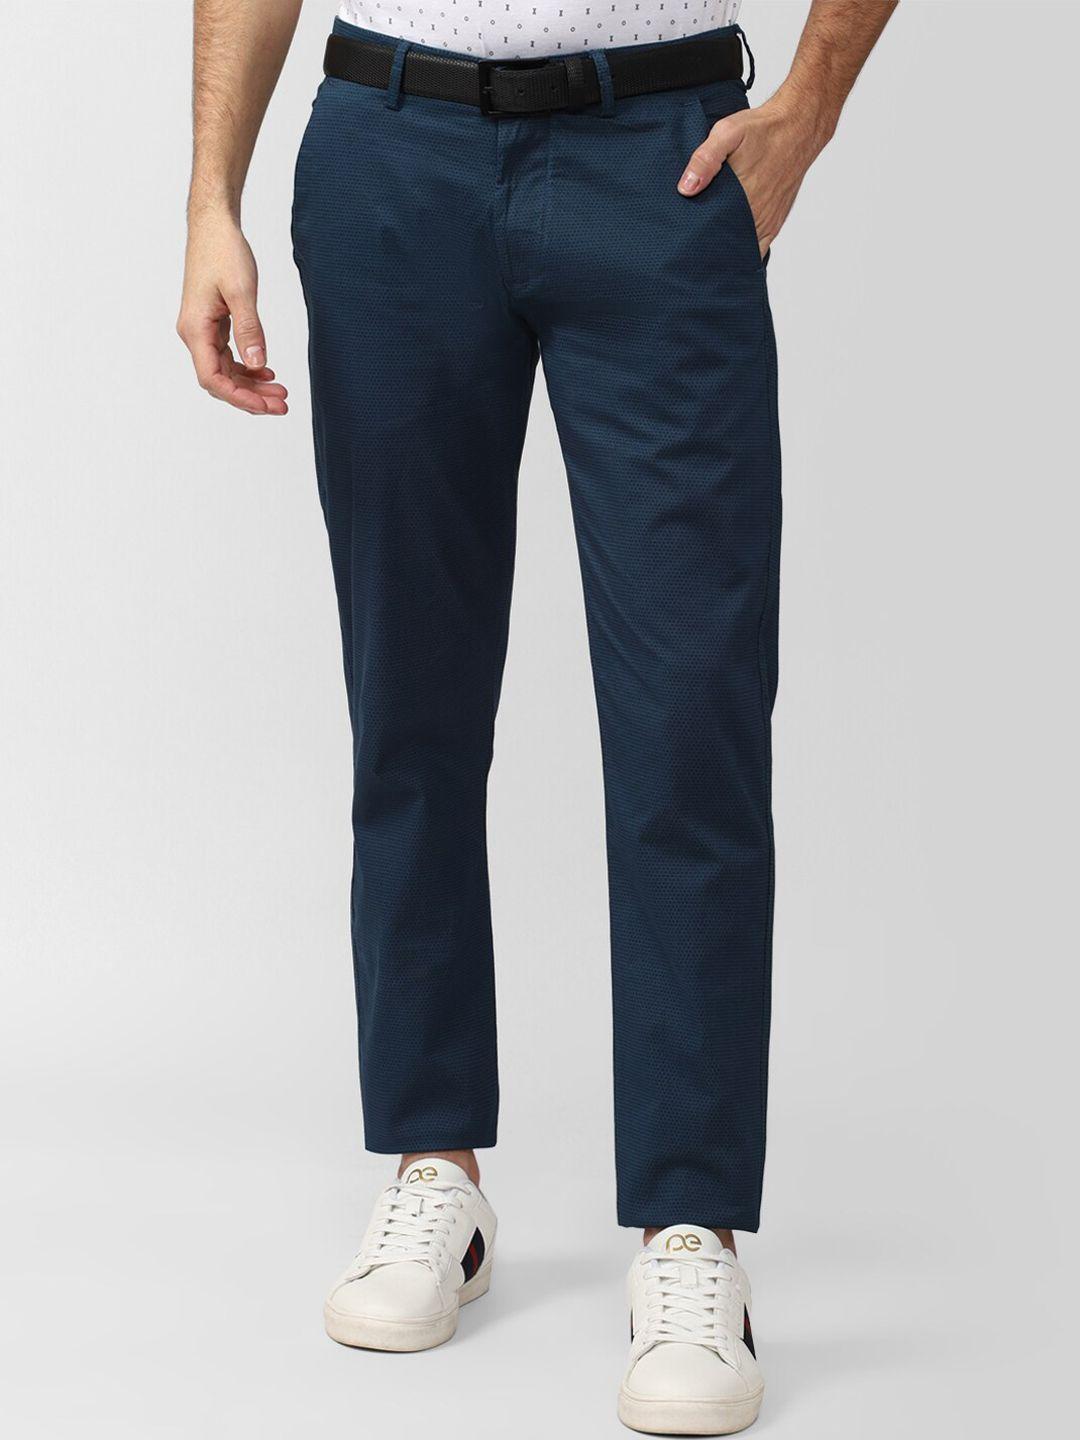 peter england casuals men navy blue slim fit trousers